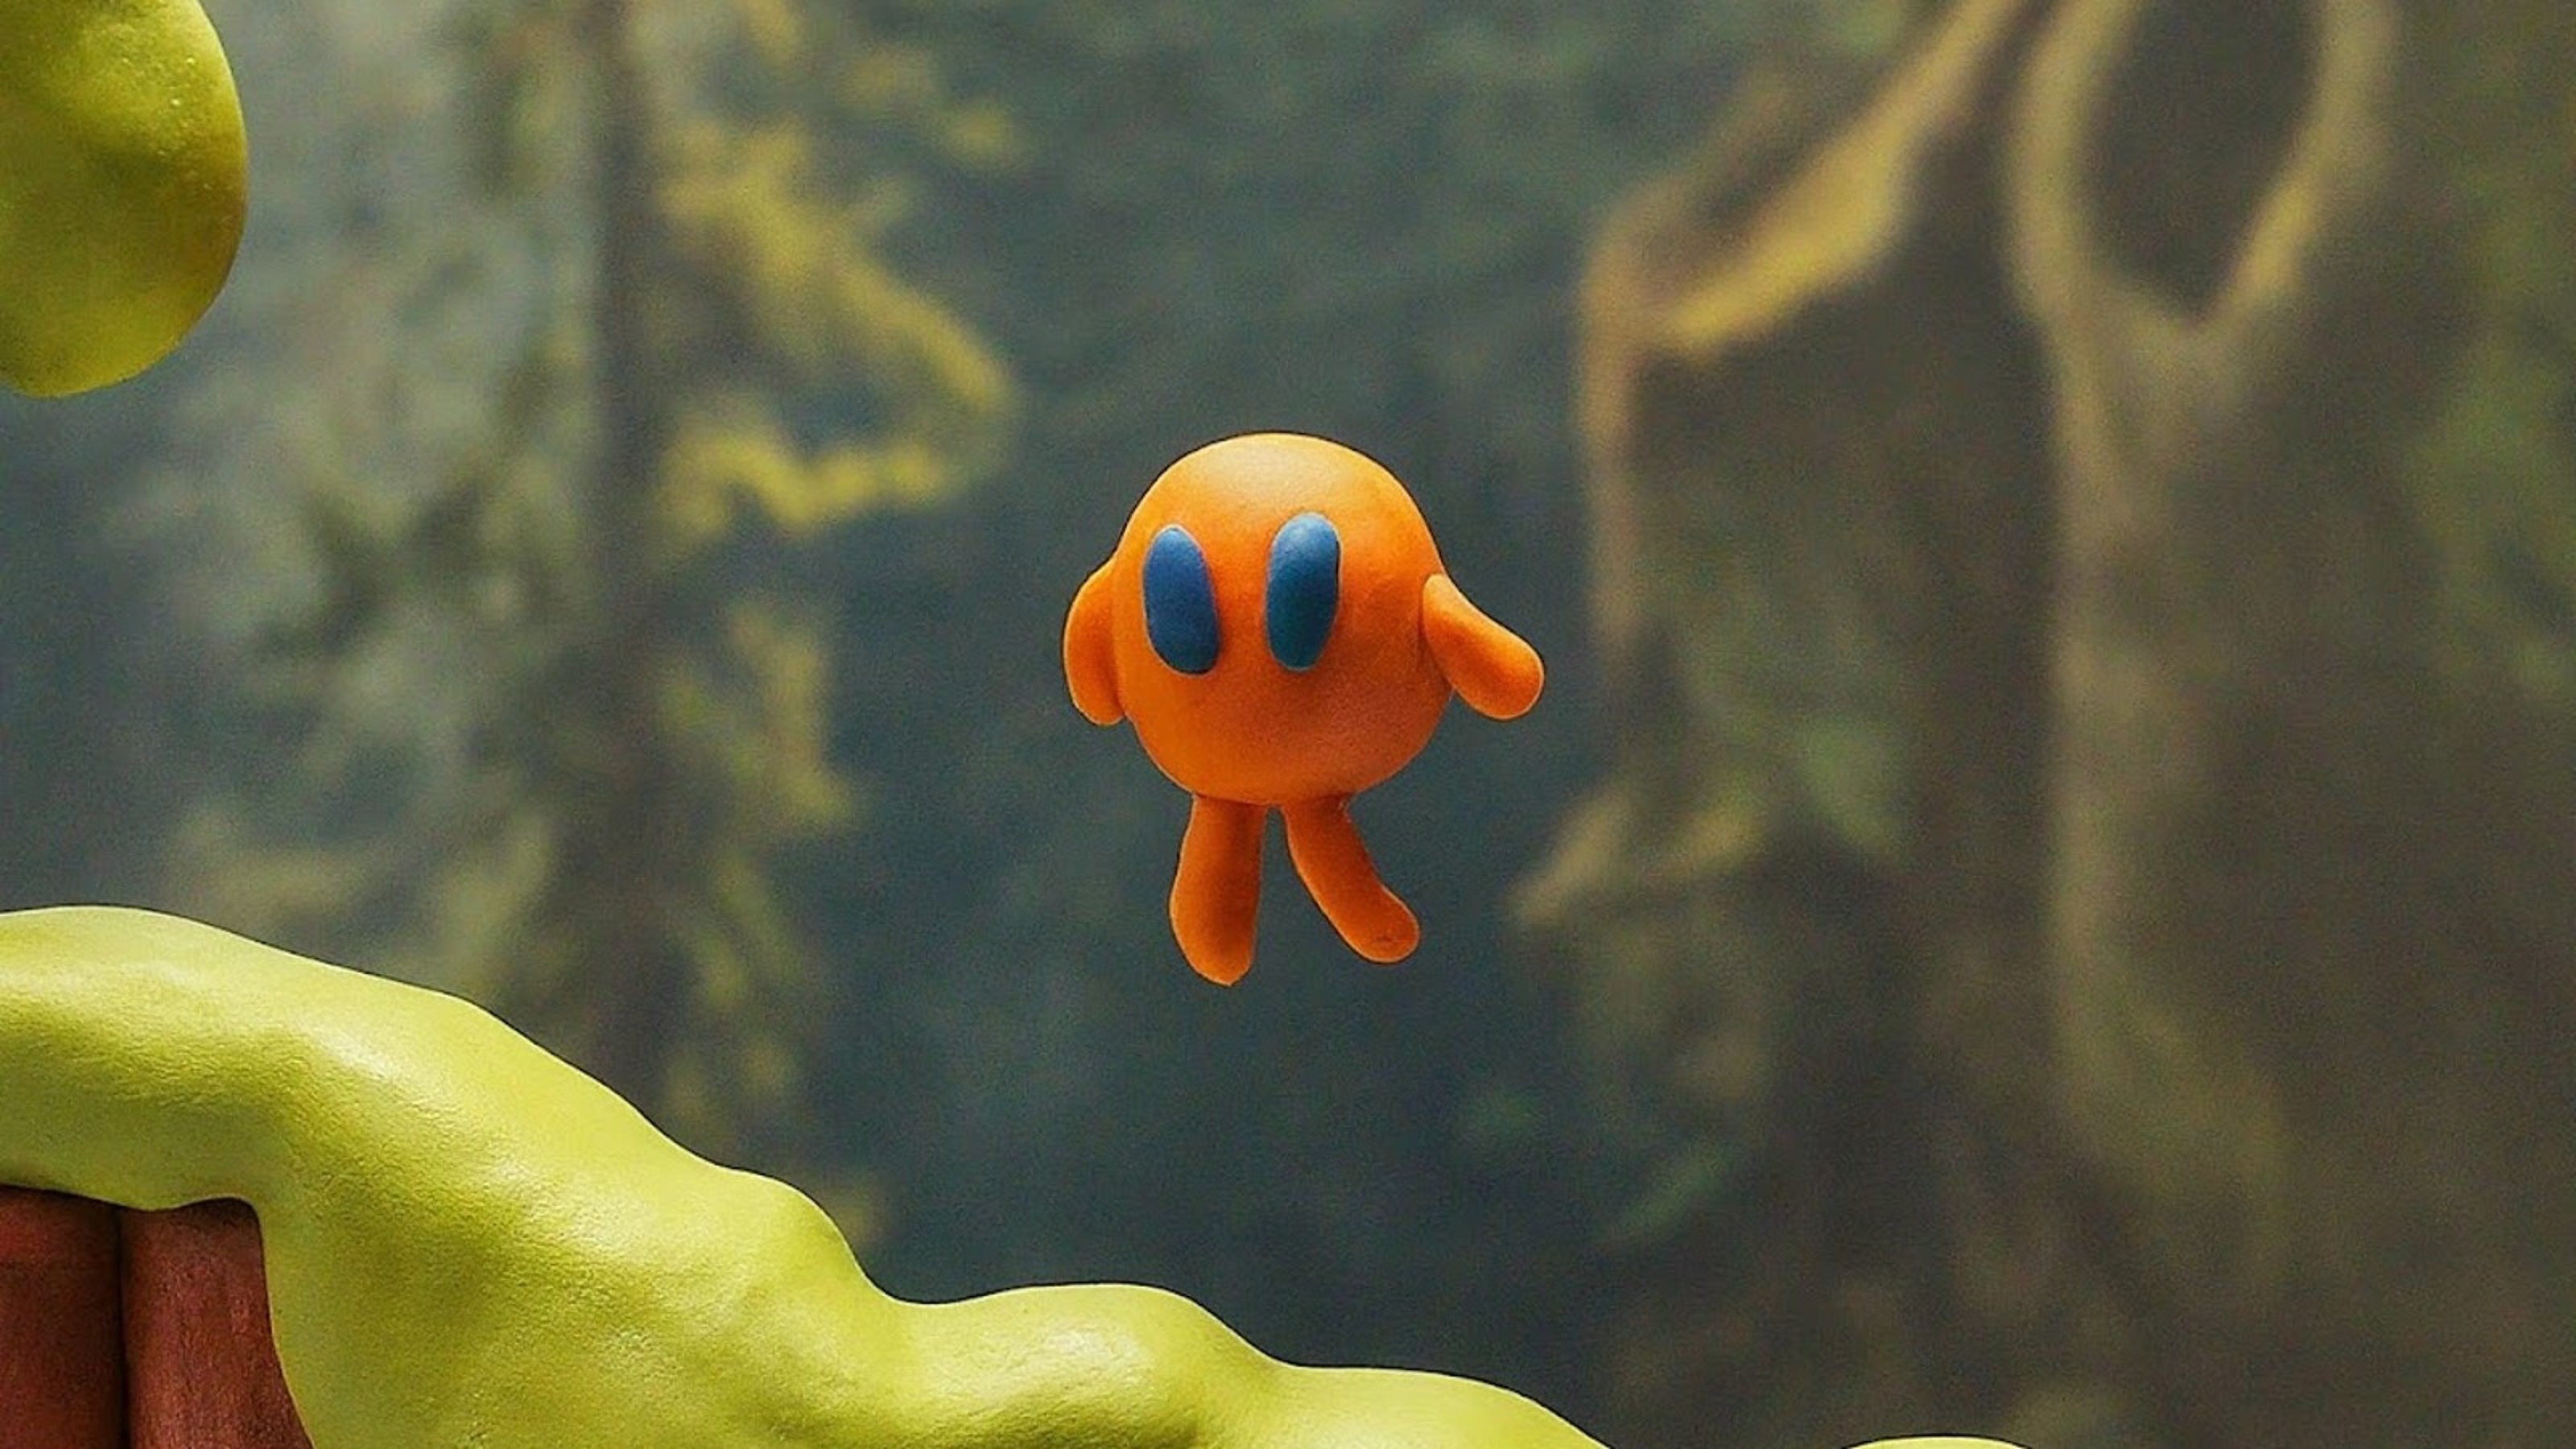 Orange character with large eyes floating against a forest backdrop.